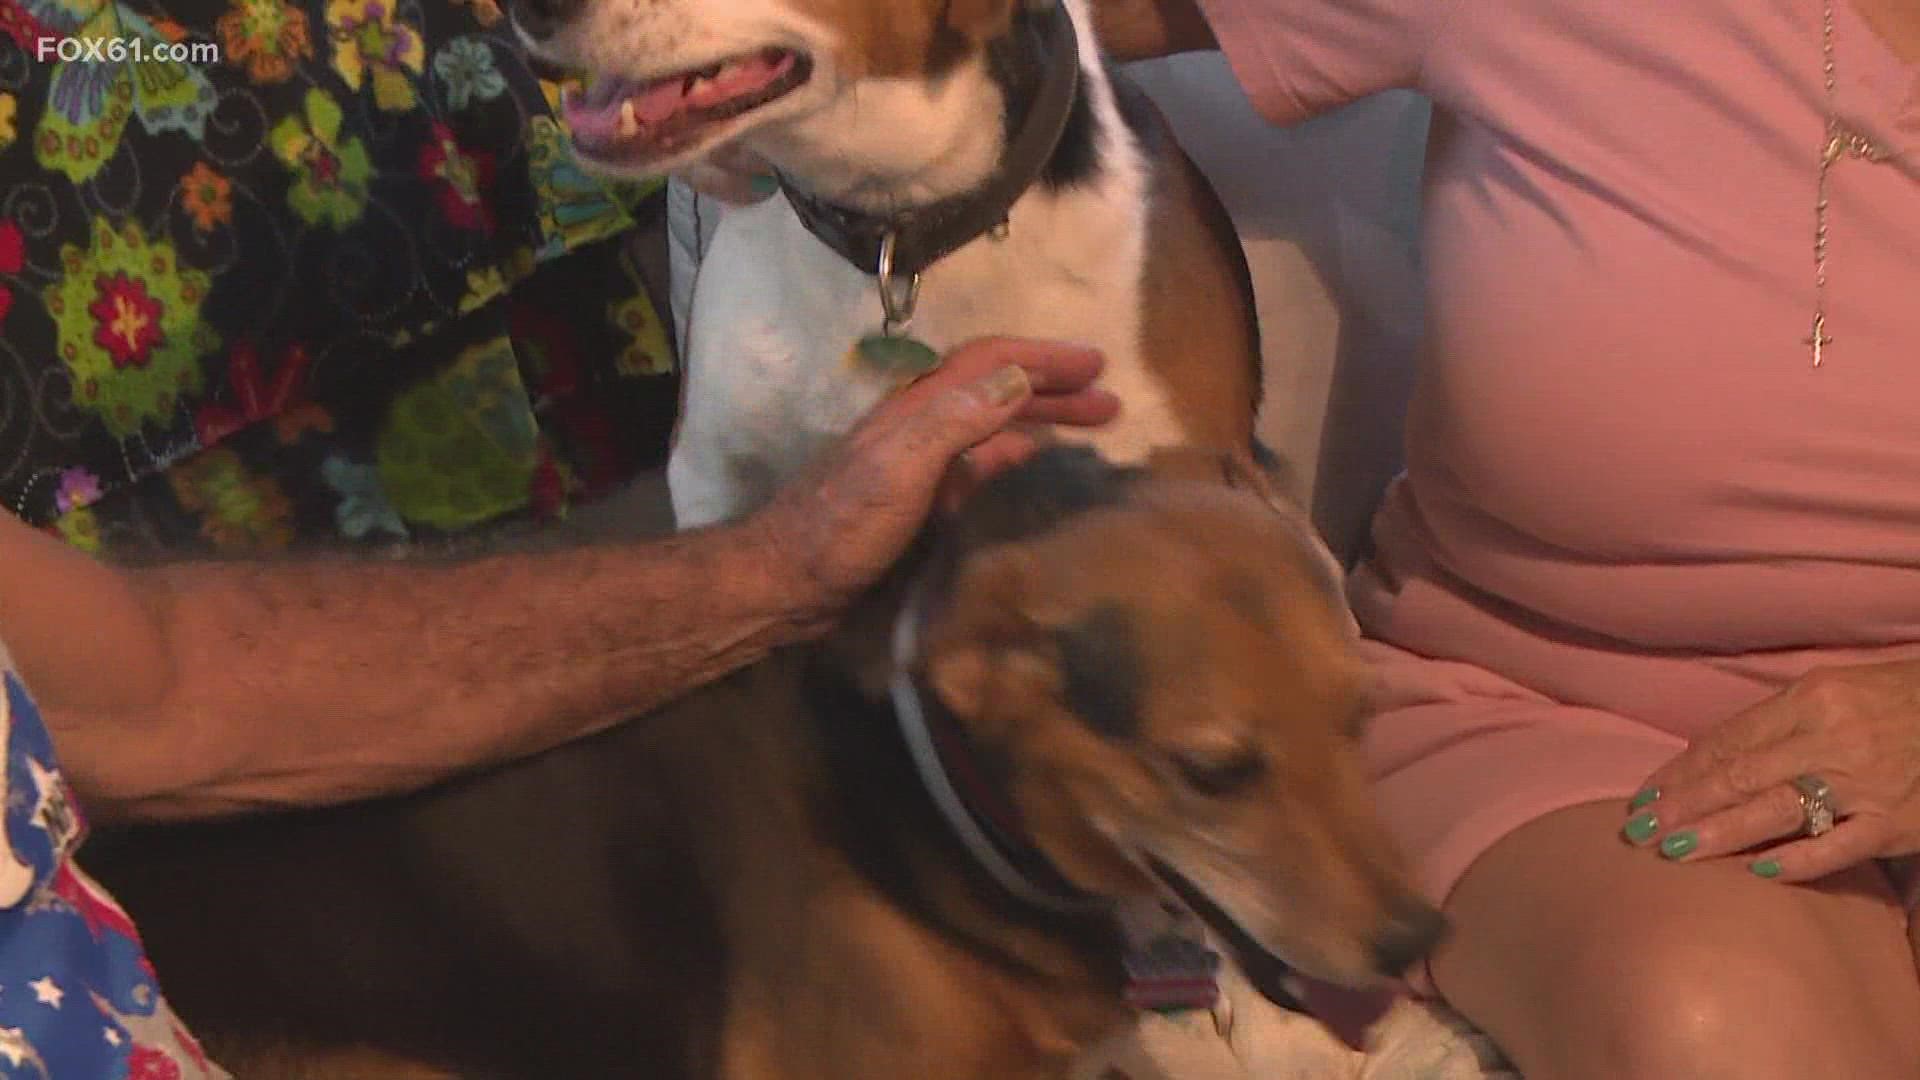 Two beagle-hound mixes are back home in East Haven after being stolen alongside the car they were in, Sunday.